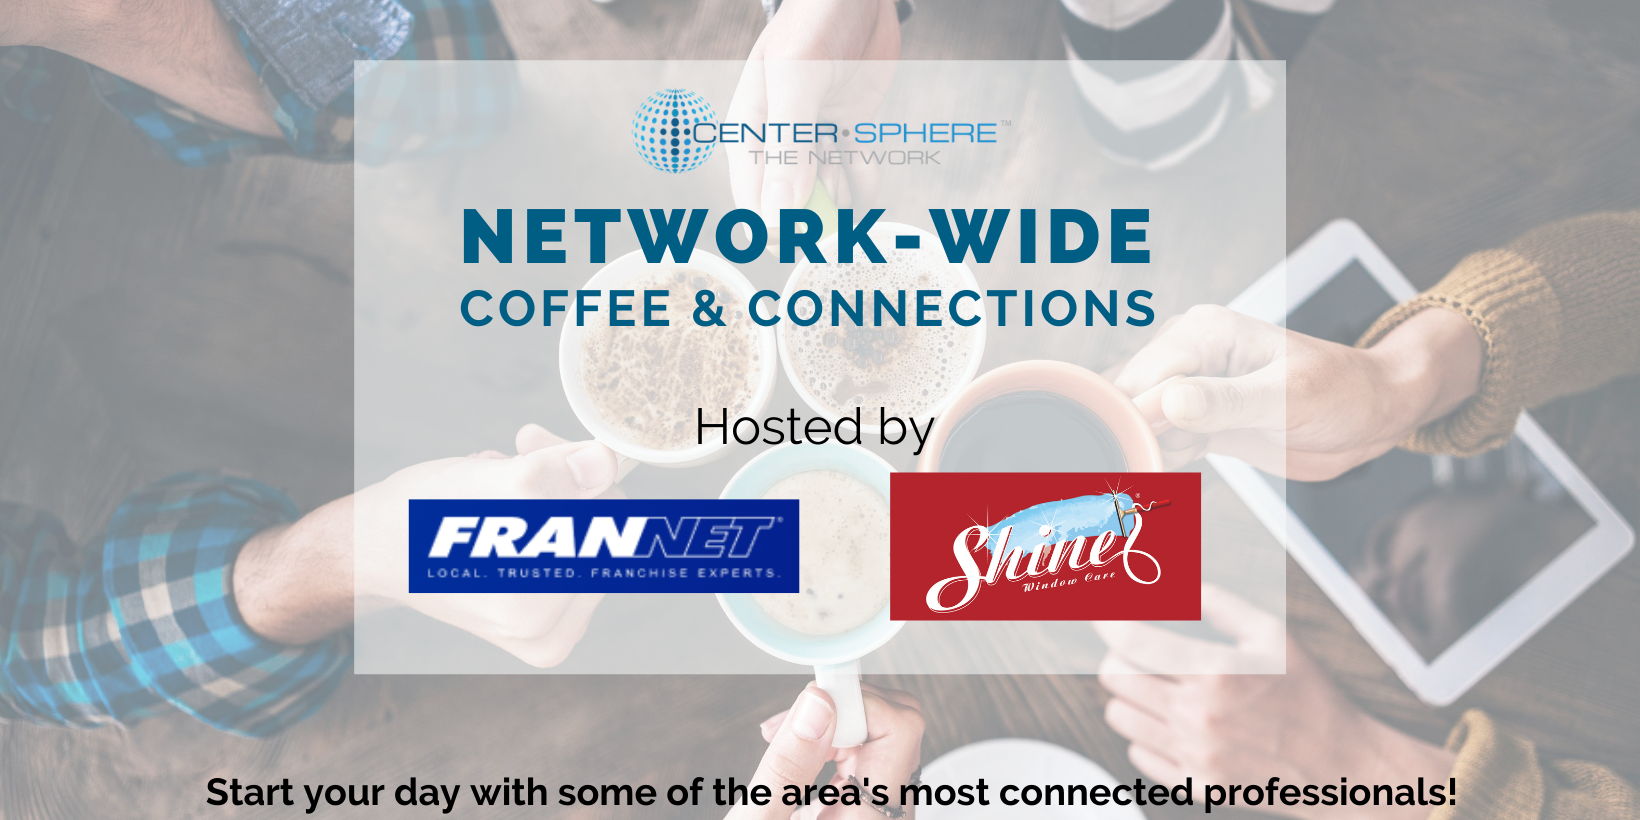 Omaha Network-Wide Coffee & Connections promotional image